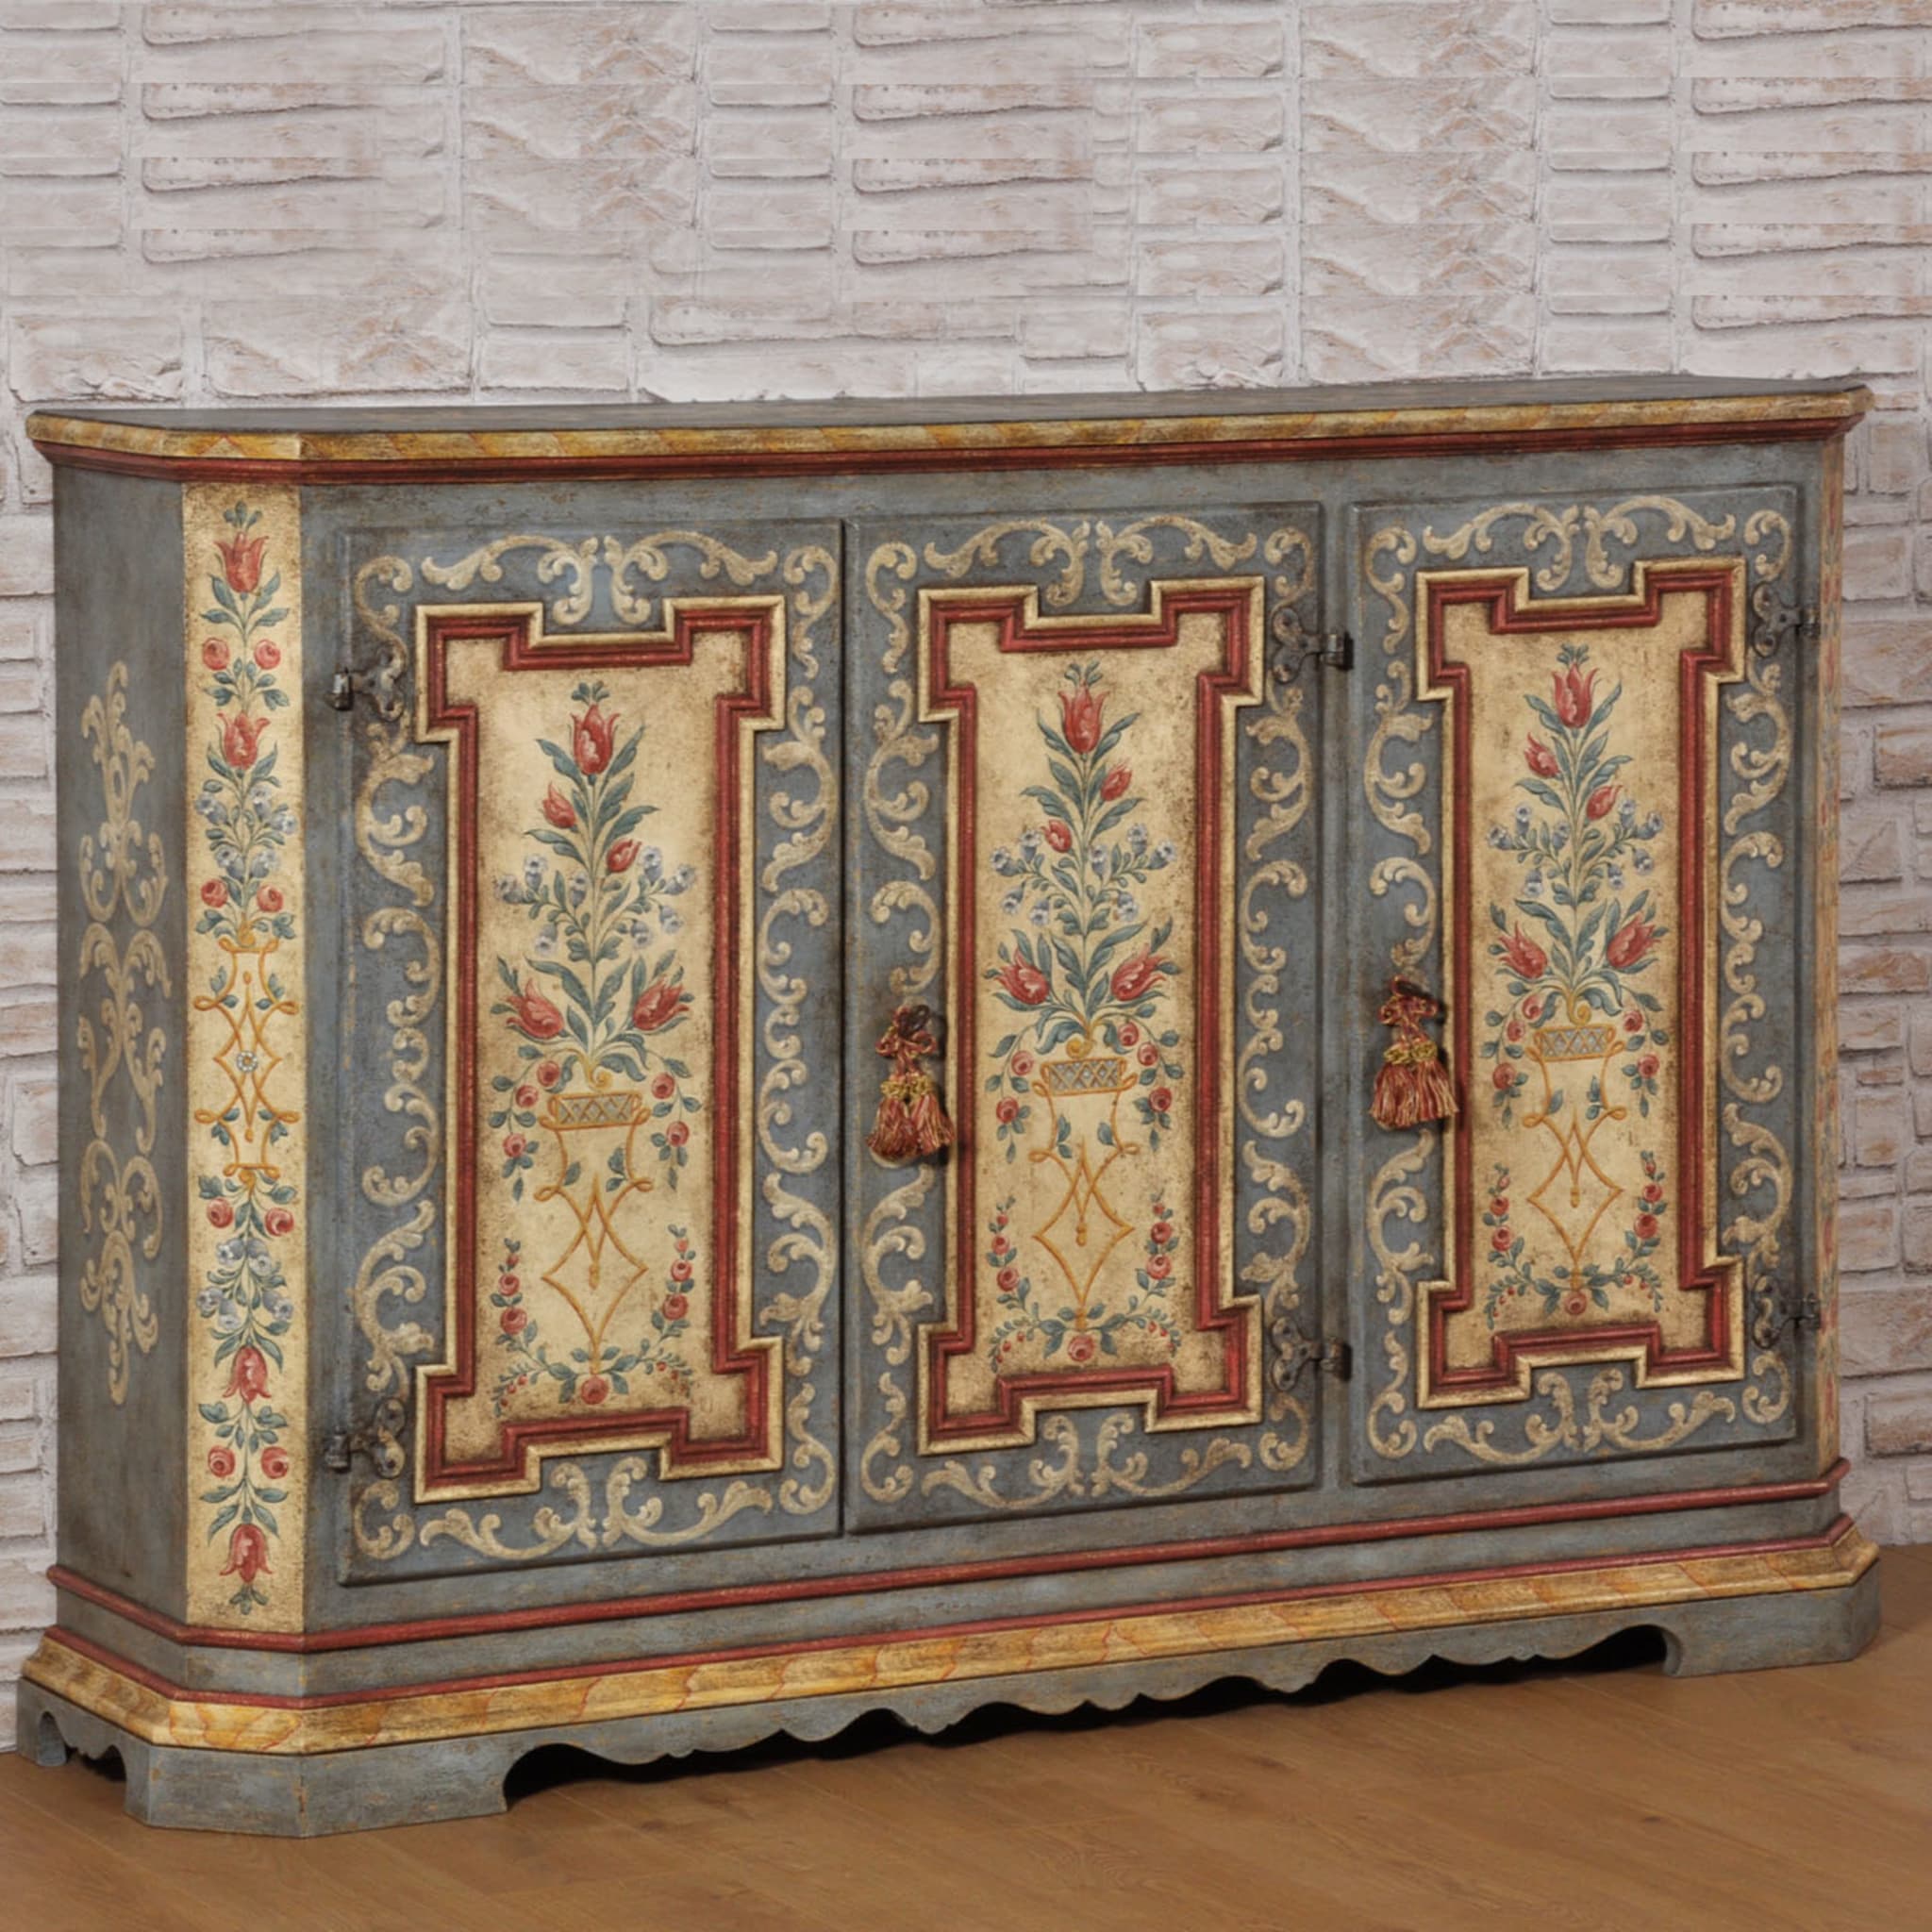 18th-Century Baroque Tyrolean-Style Floral Sideboard - Alternative view 1